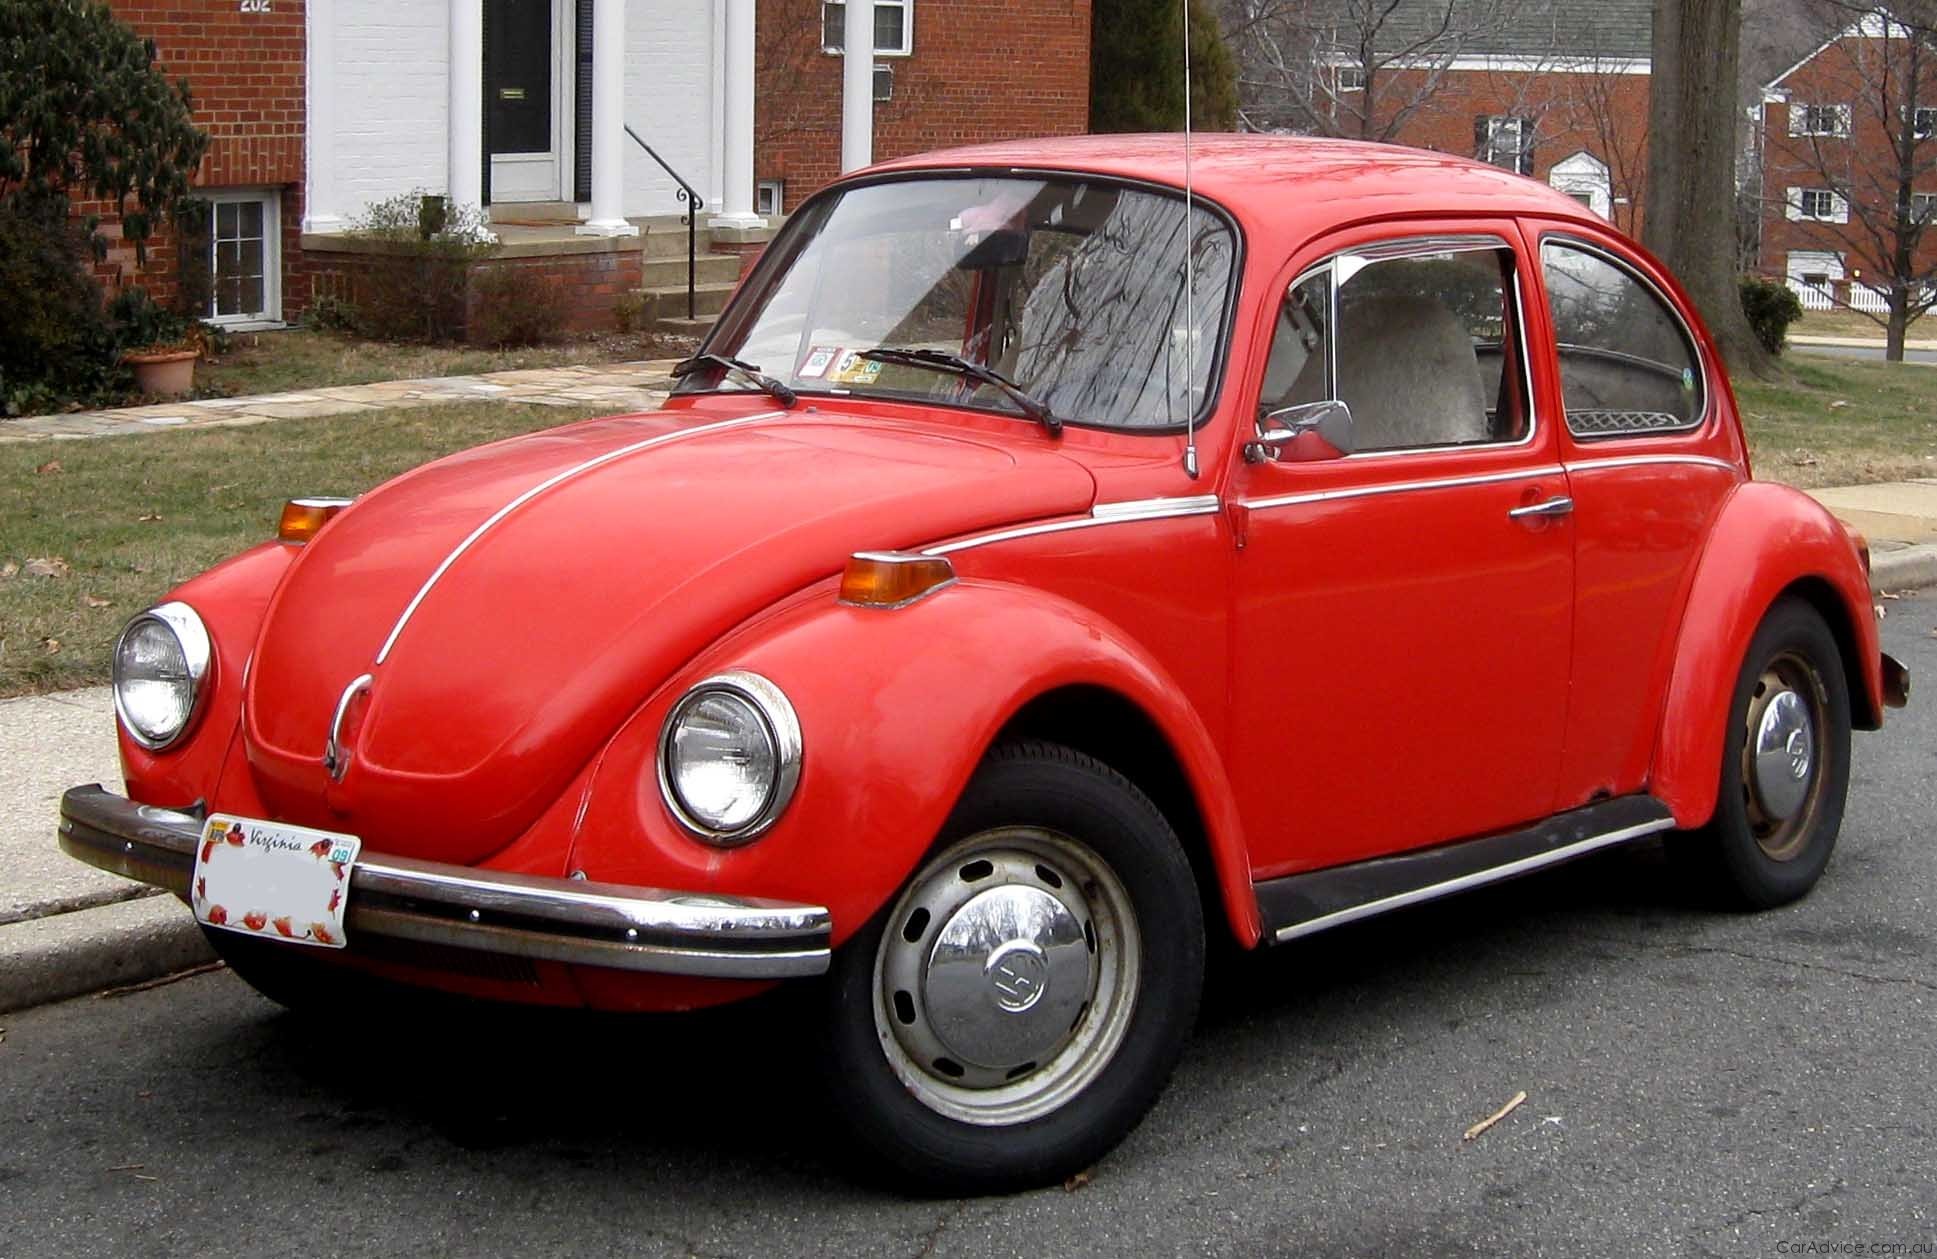 Volkswagen Beetle Germany's most popular classic car - Photos (1 of 2)